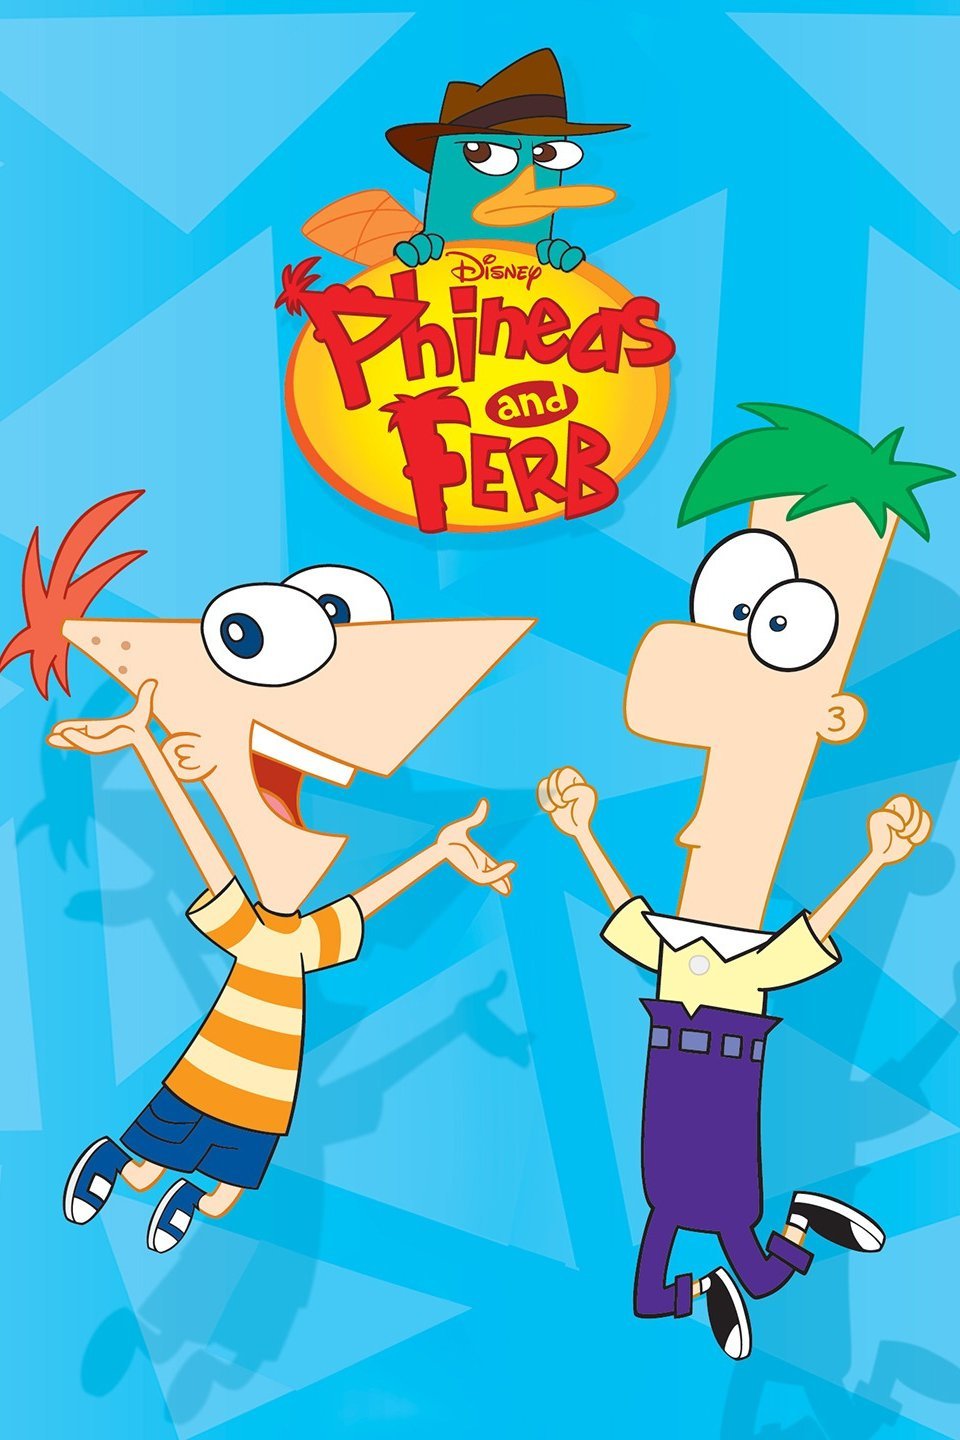 Disney Cartoon Porn Phineas And Ferb - Phineas and Ferb - Rotten Tomatoes